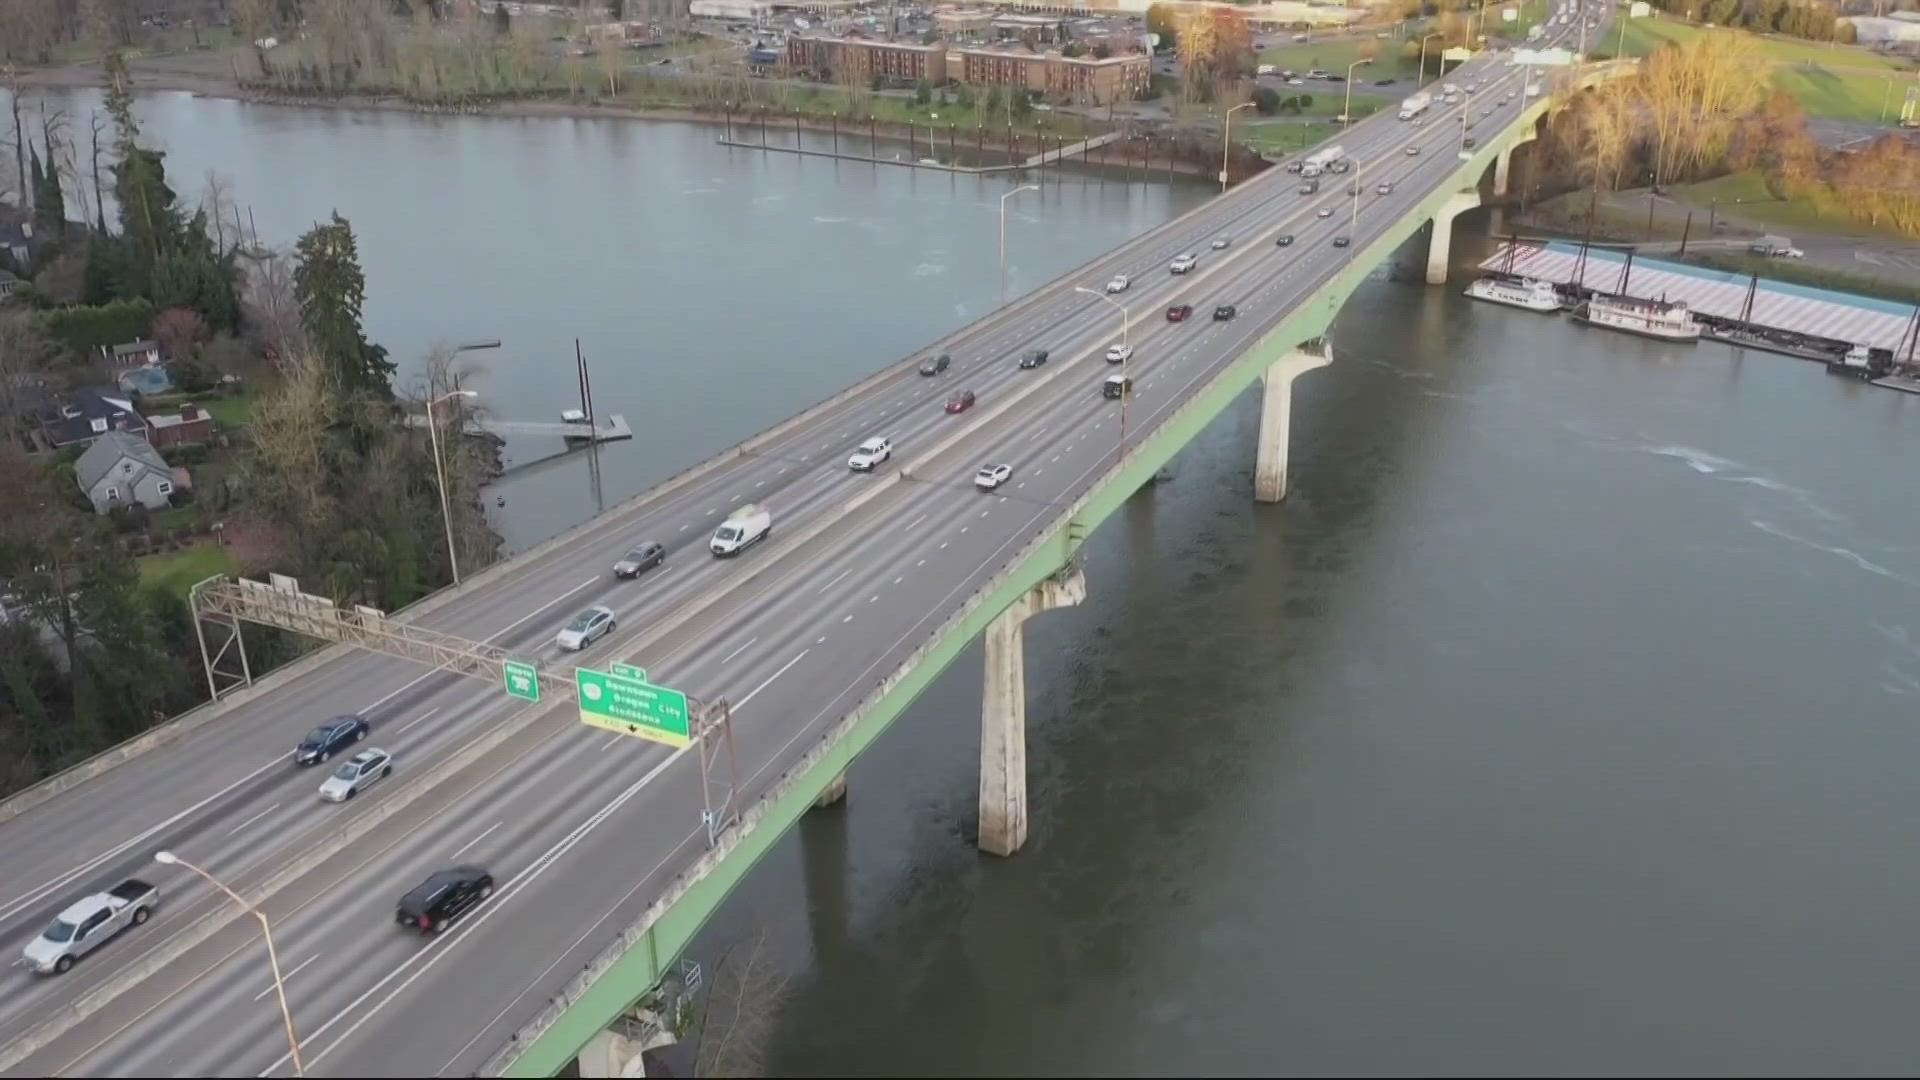 The first tolling project in the Portland area is moving forward despite opposition from drivers and some city leaders.